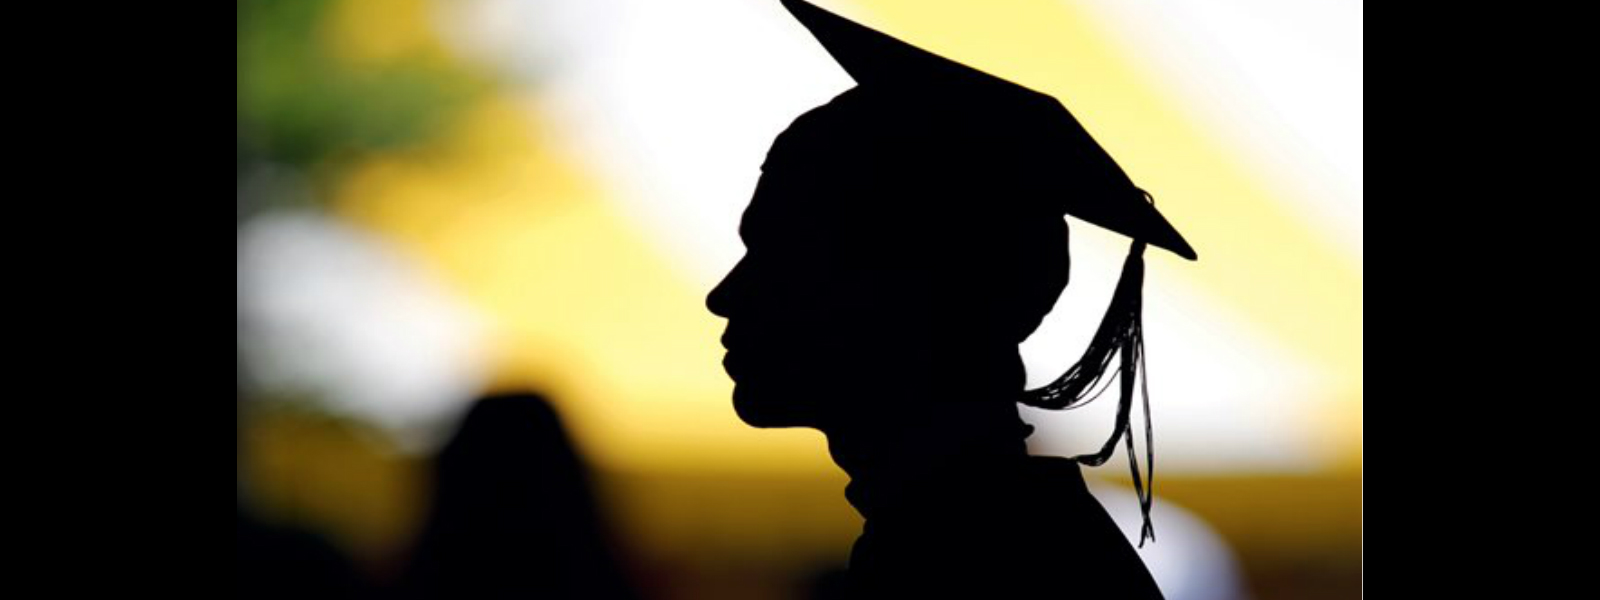 Numeber of unemployed graduates in country risen